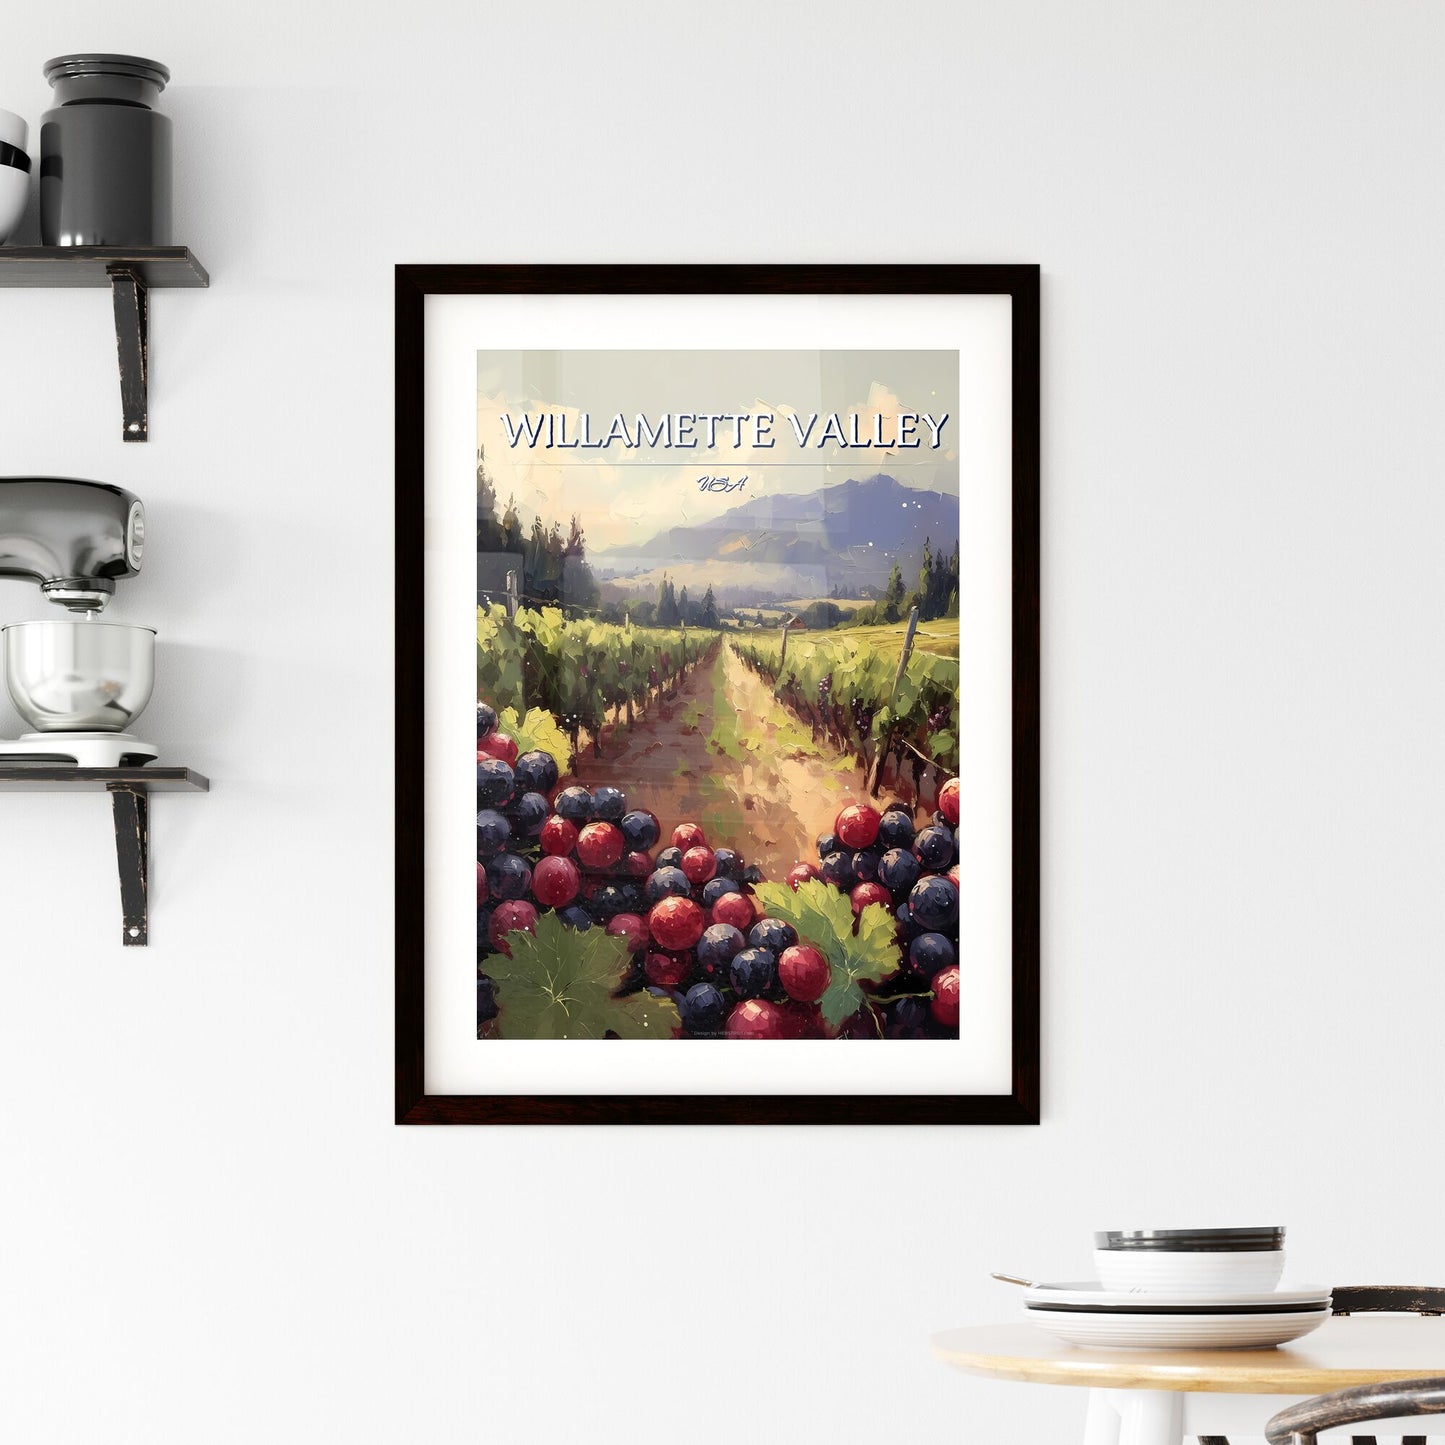 Willamette Valley, USA - Art print of a painting of grapes in a vineyard Default Title